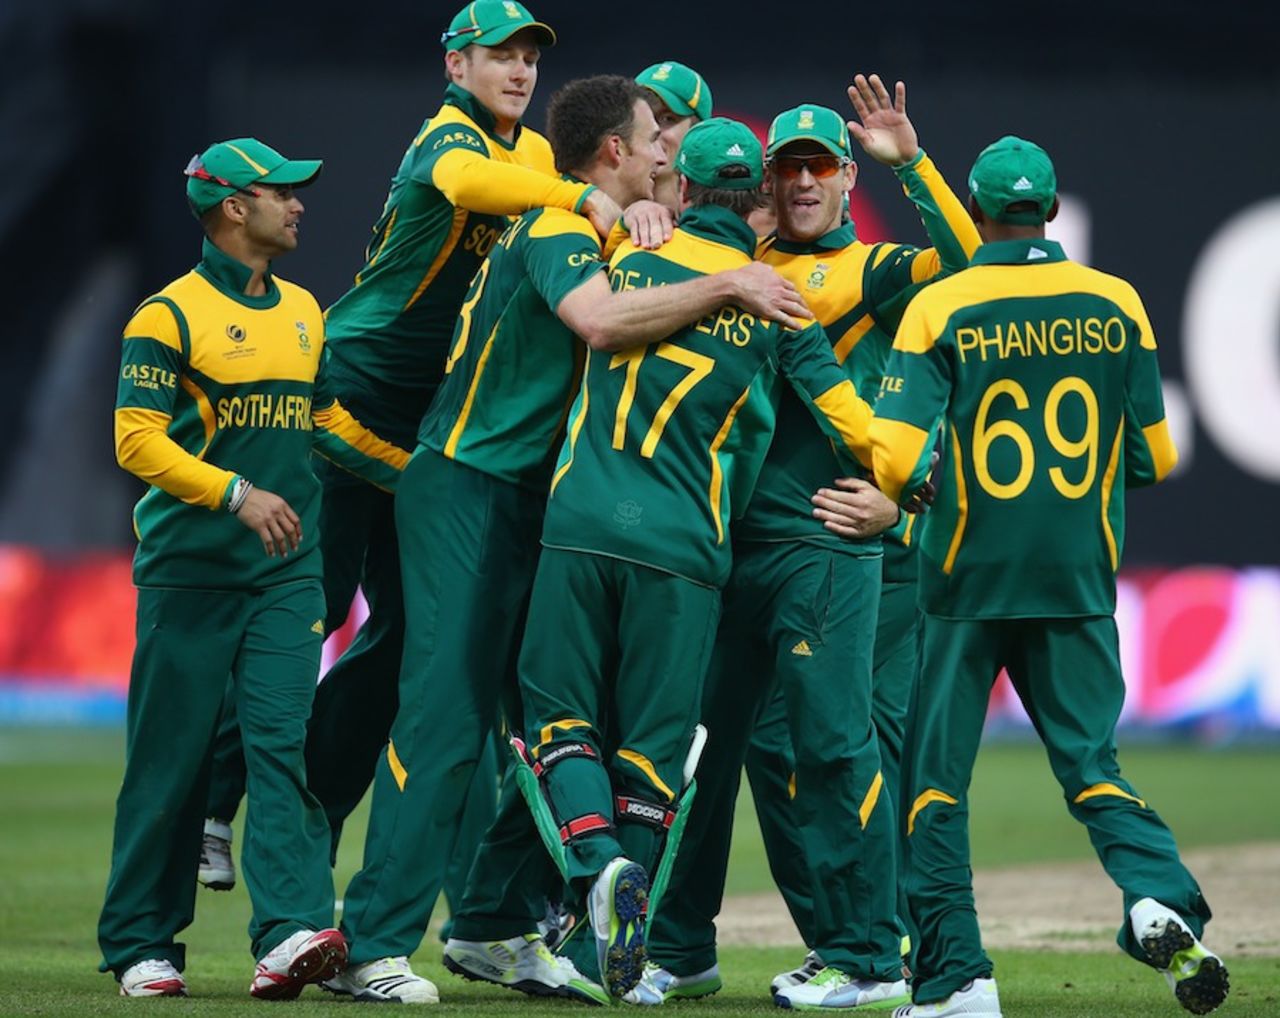 The South Africans celebrate Kamran Akmal's wicket, Pakistan v South Africa, Champions Trophy, Group B, Edgbaston, June 10, 2013